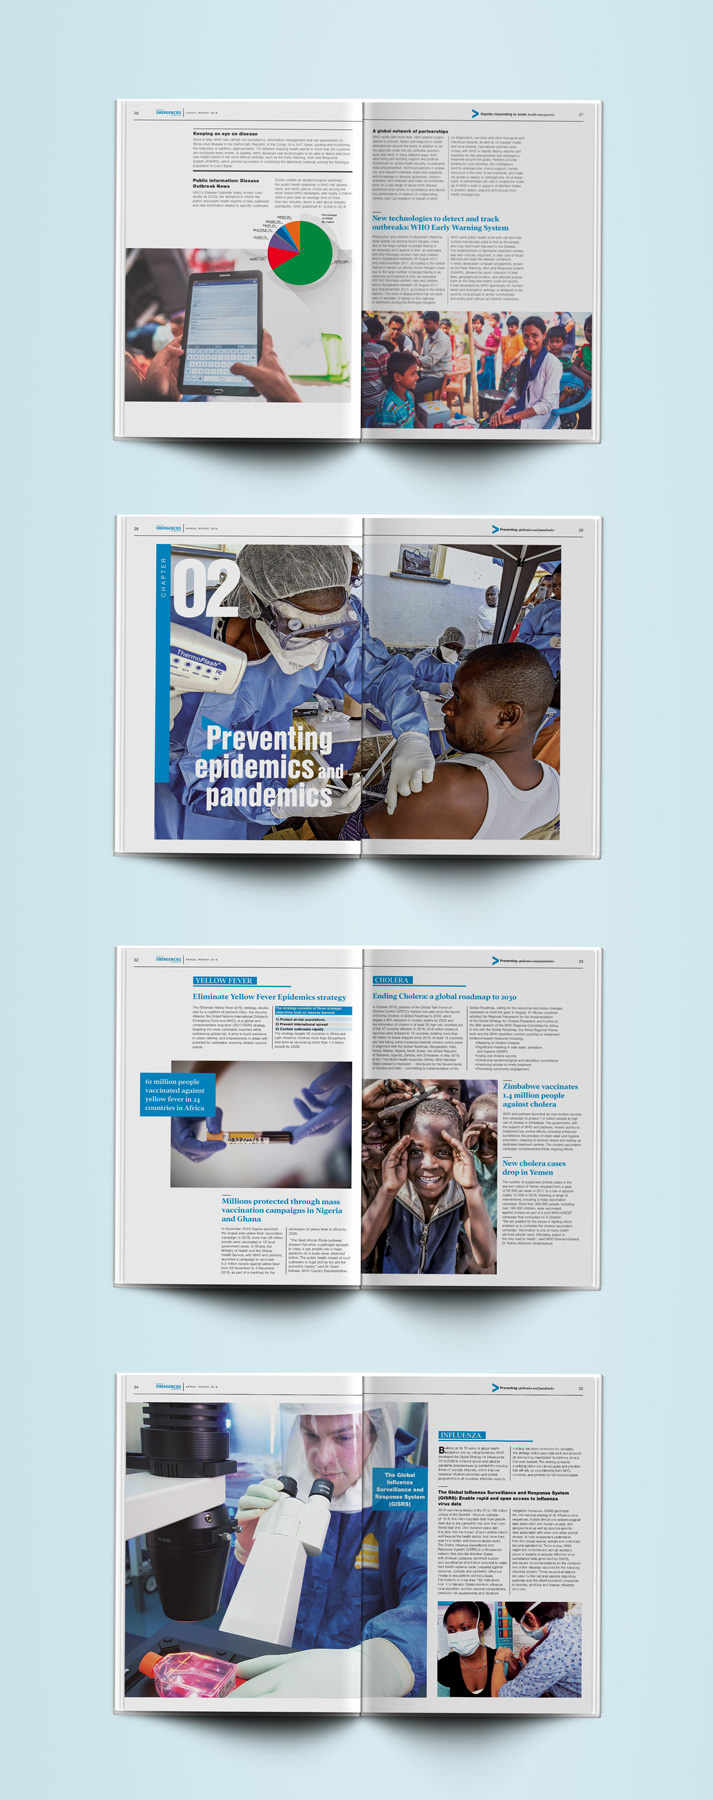 annual report communication edition graphisme LCAANDCO mise en page oms